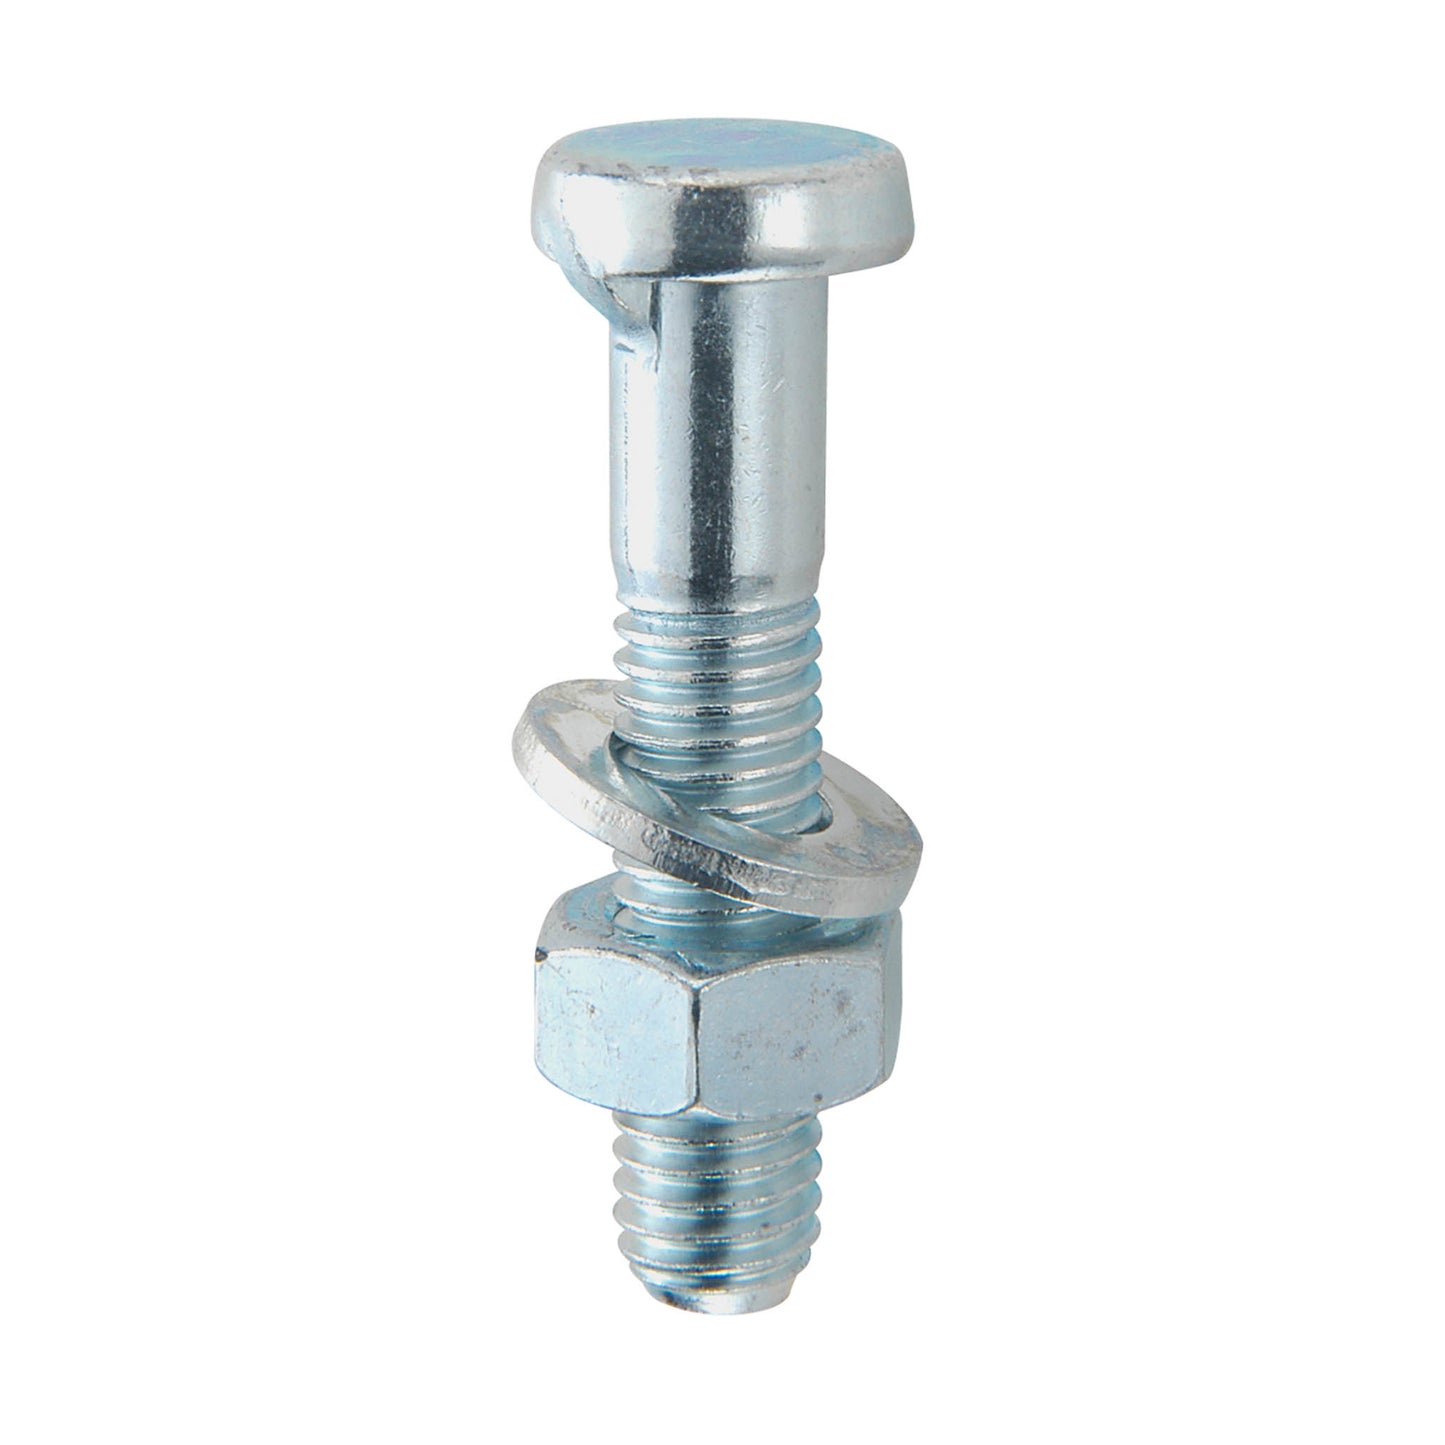 Handlebar and seat post clamping bolts M 8 x 35 set, galvanized steel